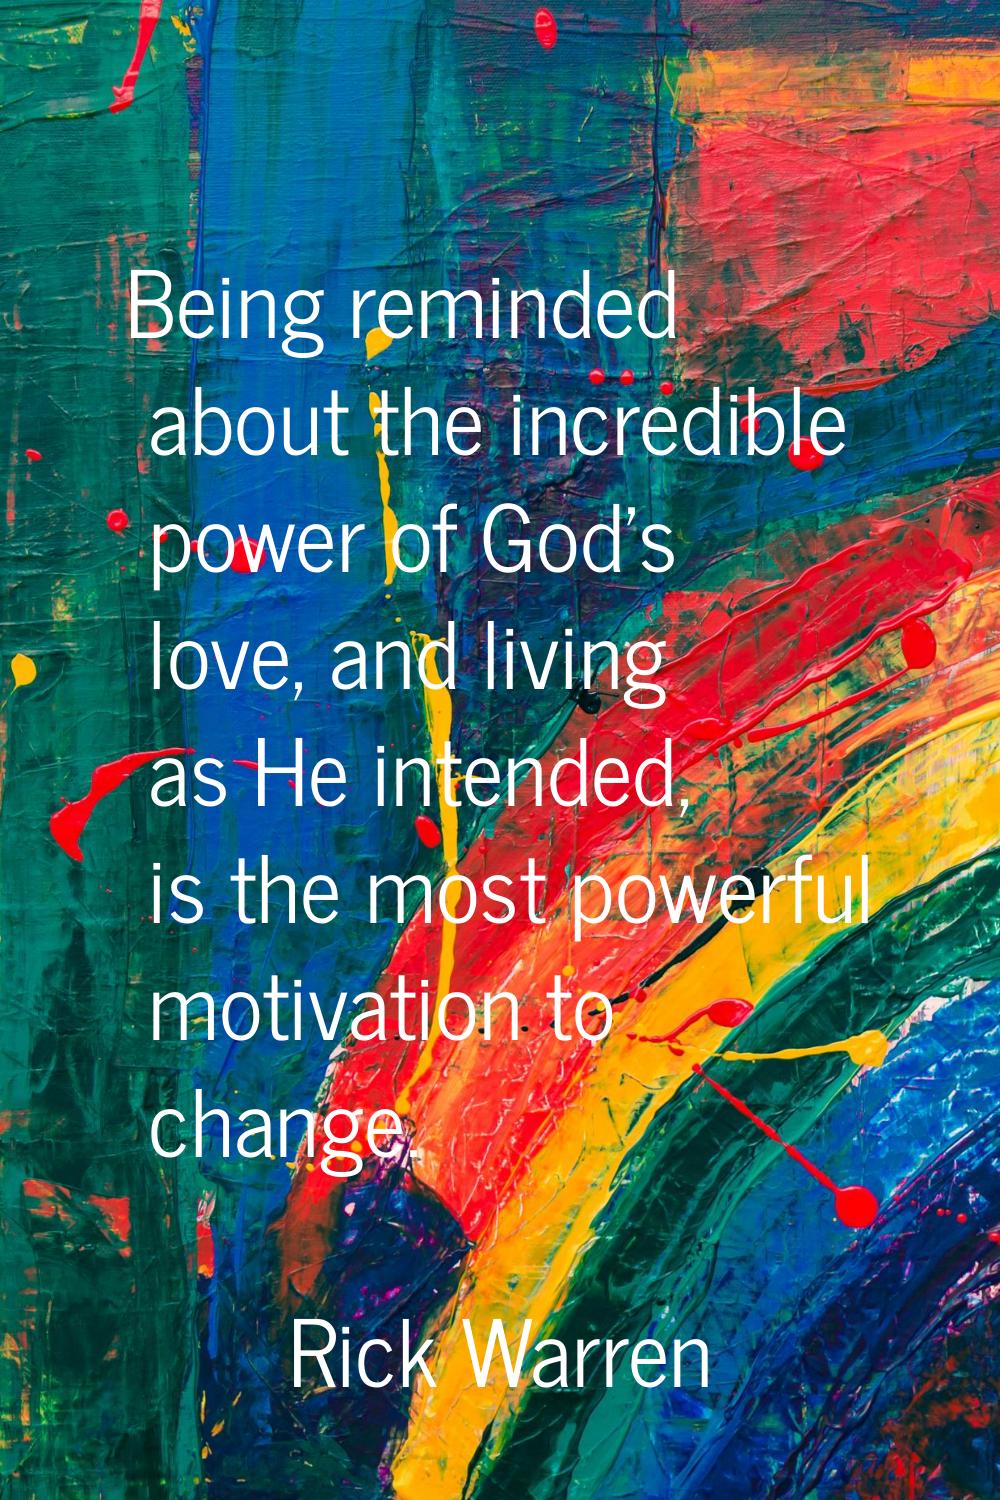 Being reminded about the incredible power of God's love, and living as He intended, is the most pow